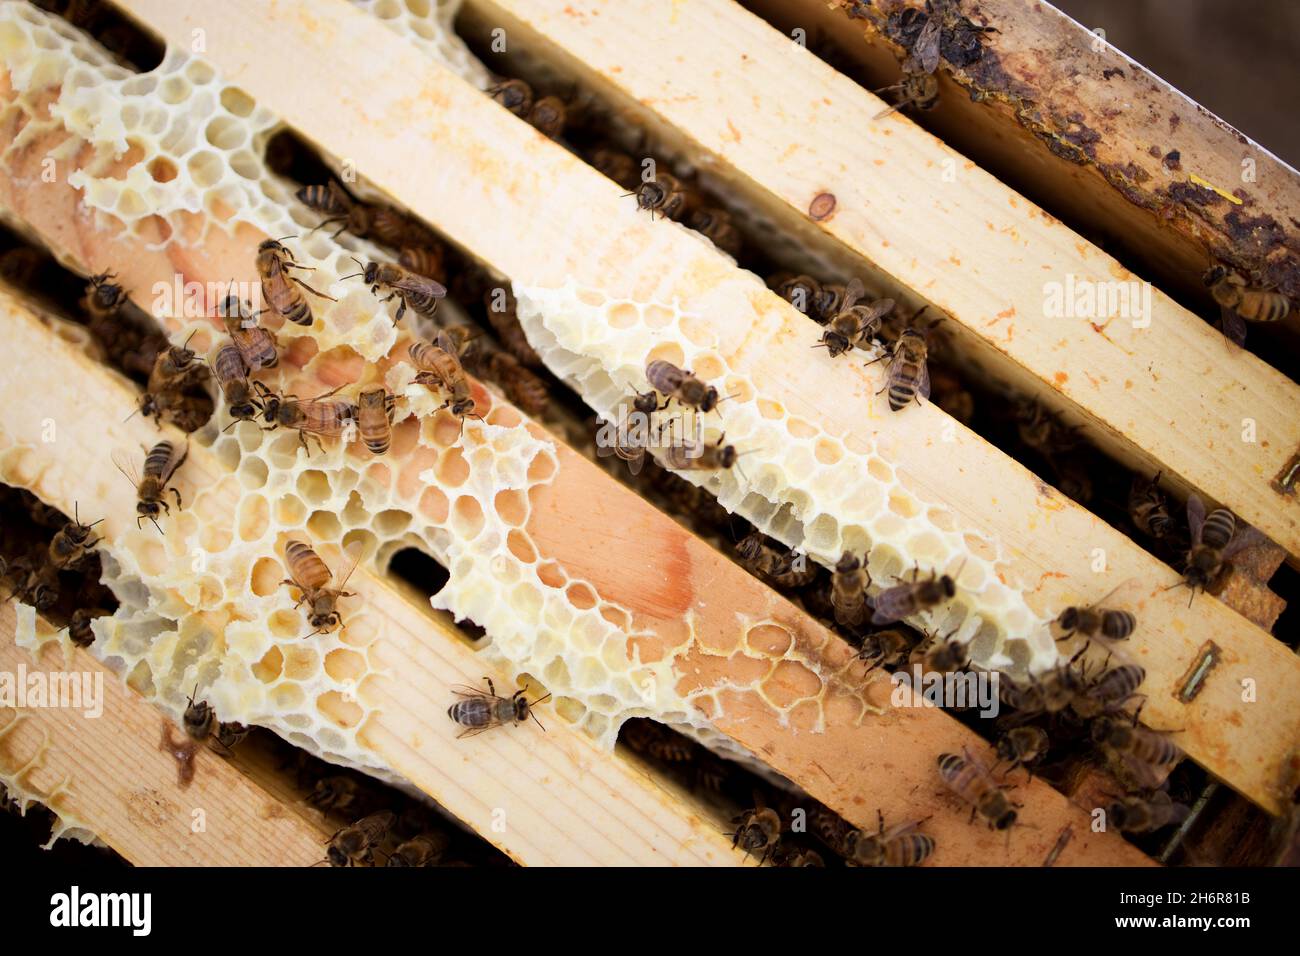 The inner workings of a langstroth hive in rural Alberta. Honeybees cluster on wax-covered frames at a honey farm. Stock Photo